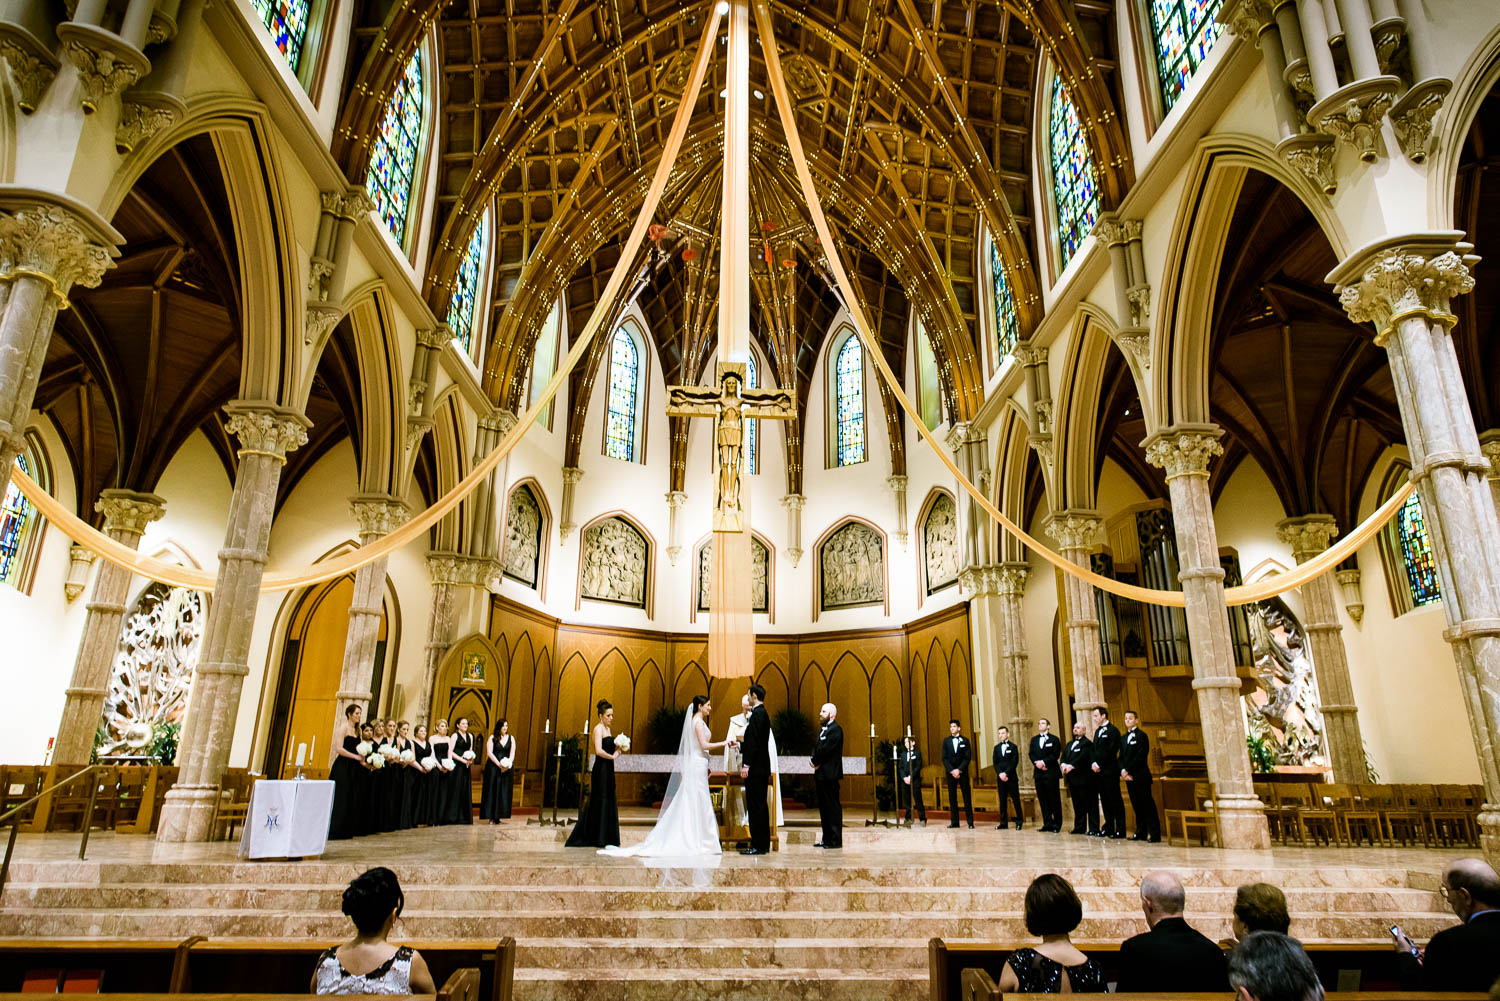 Holy Name Cathedral wedding ceremony.